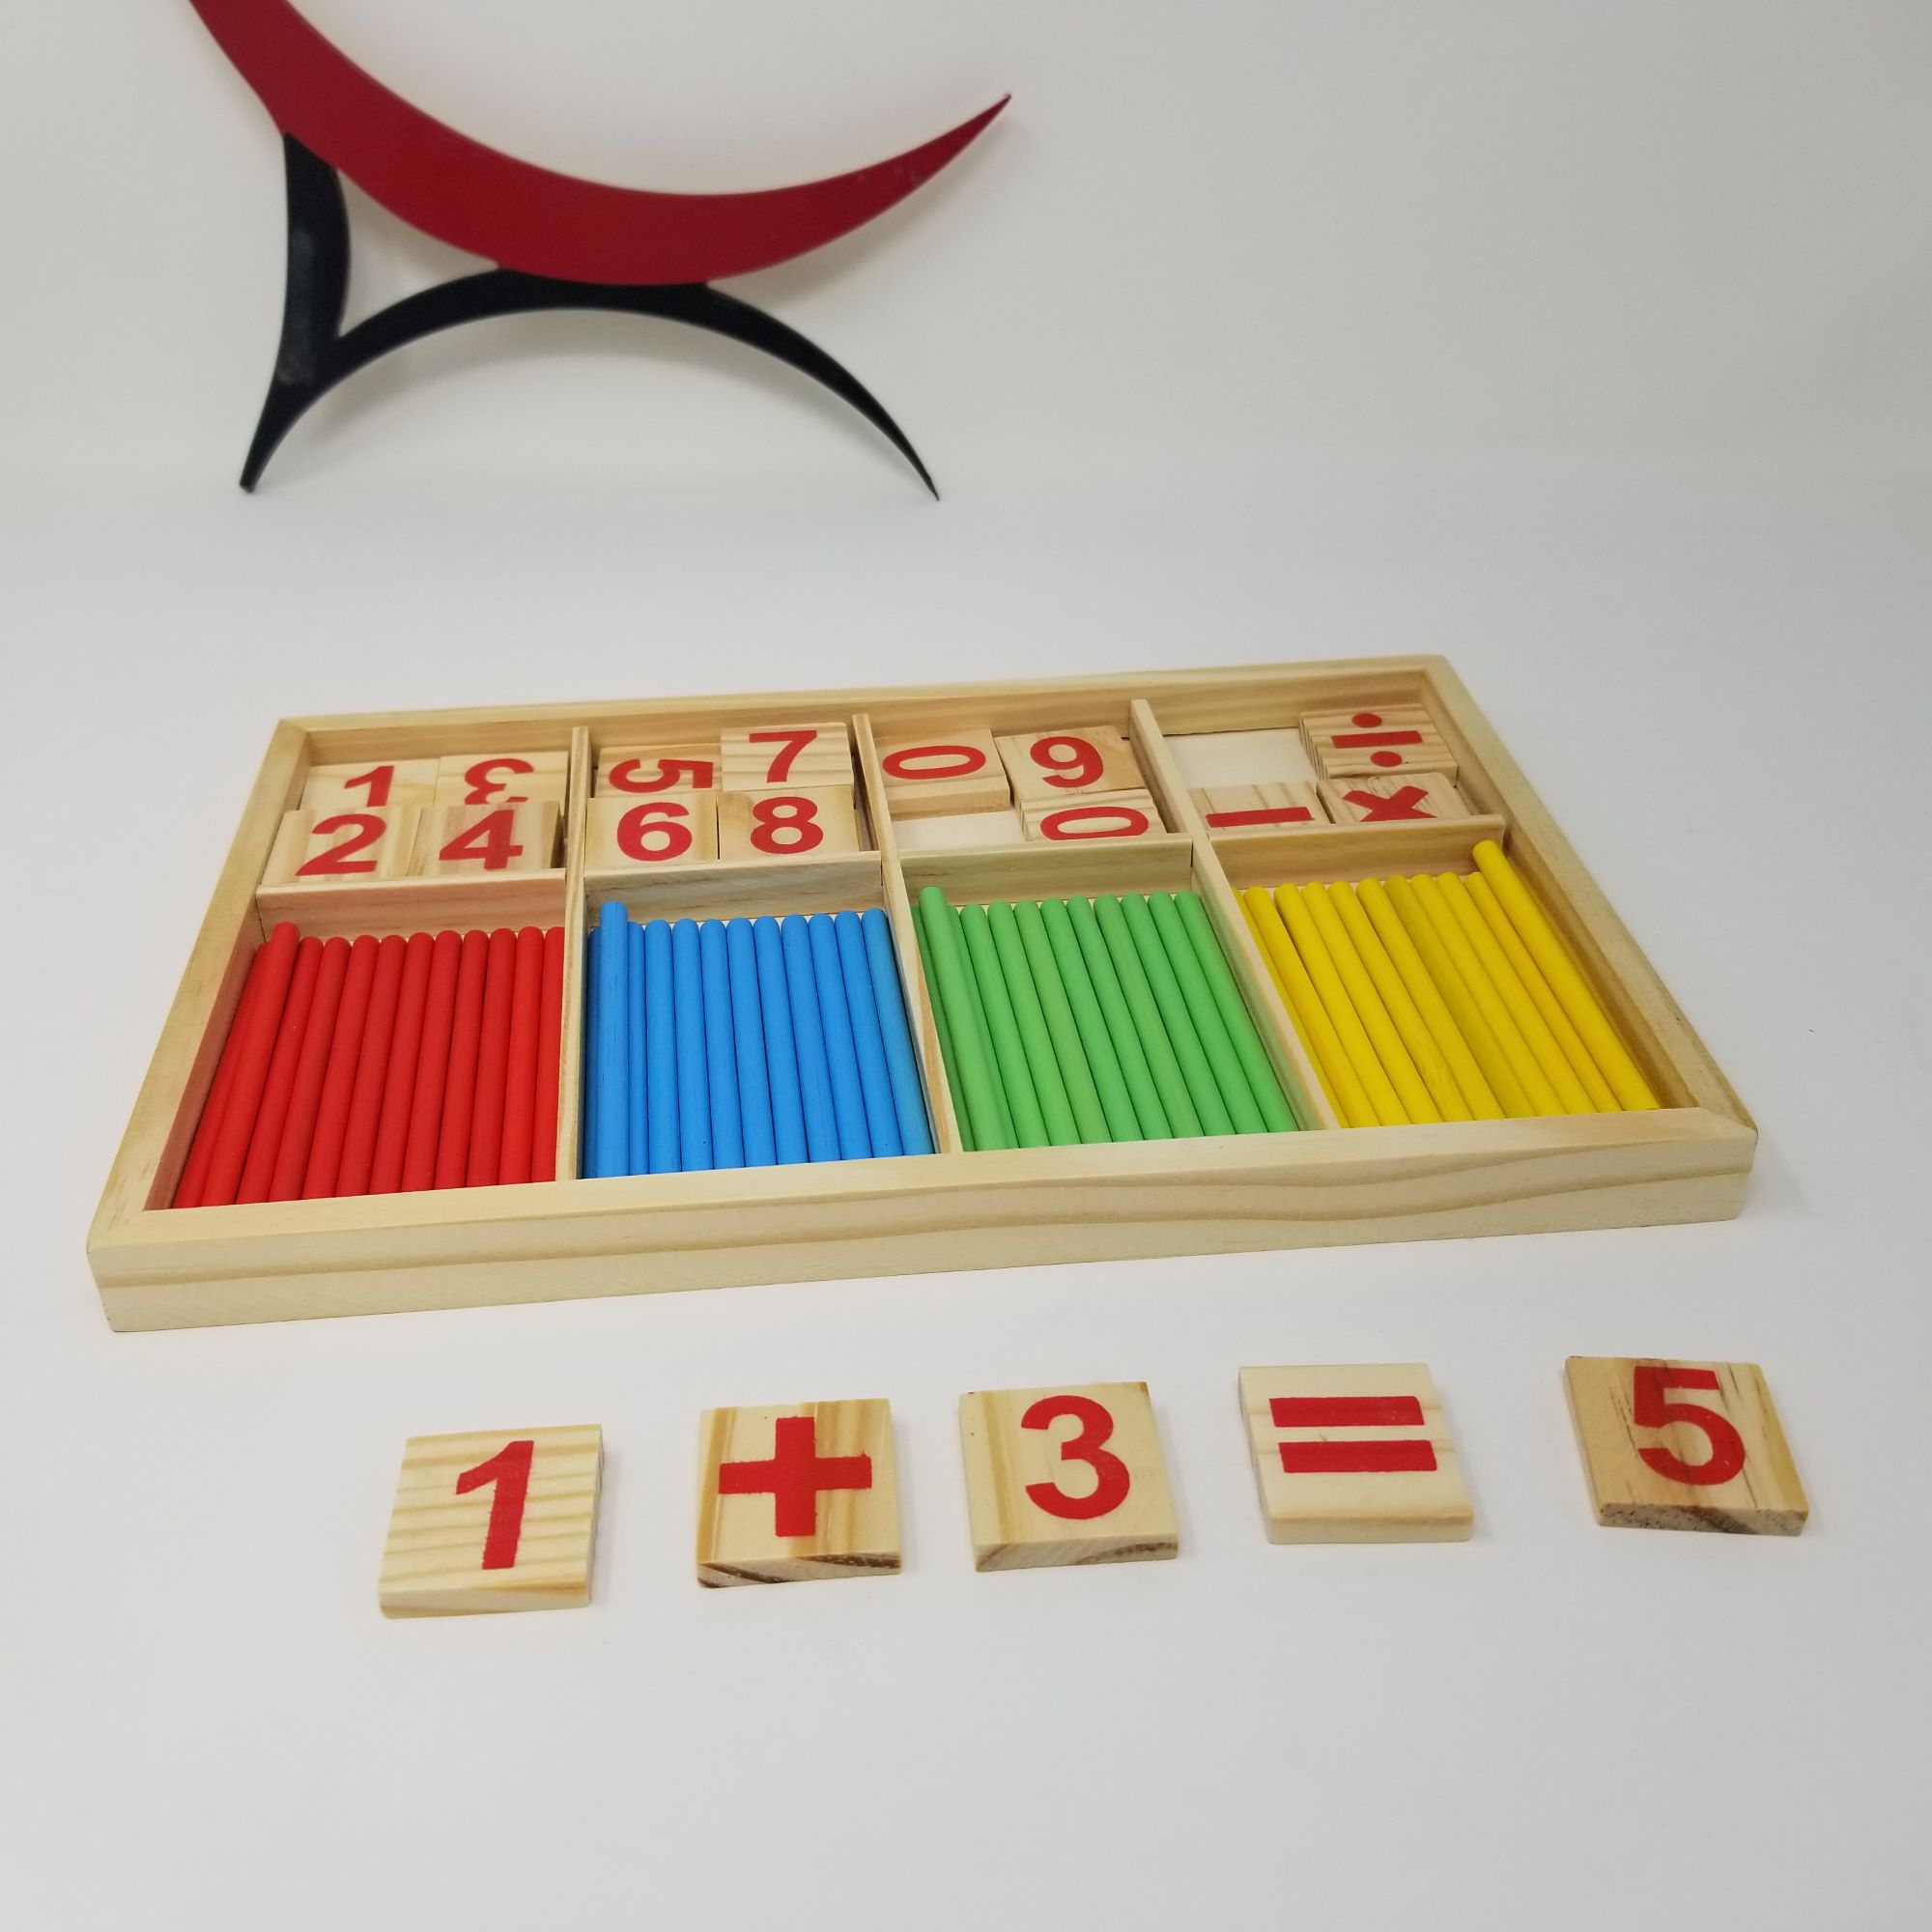 Montessori Toddler Counting Peg Board Box with Number- Wooden Counting Box  Toys for Toddlers 1-3,Montessori Math Manipulatives Materials and